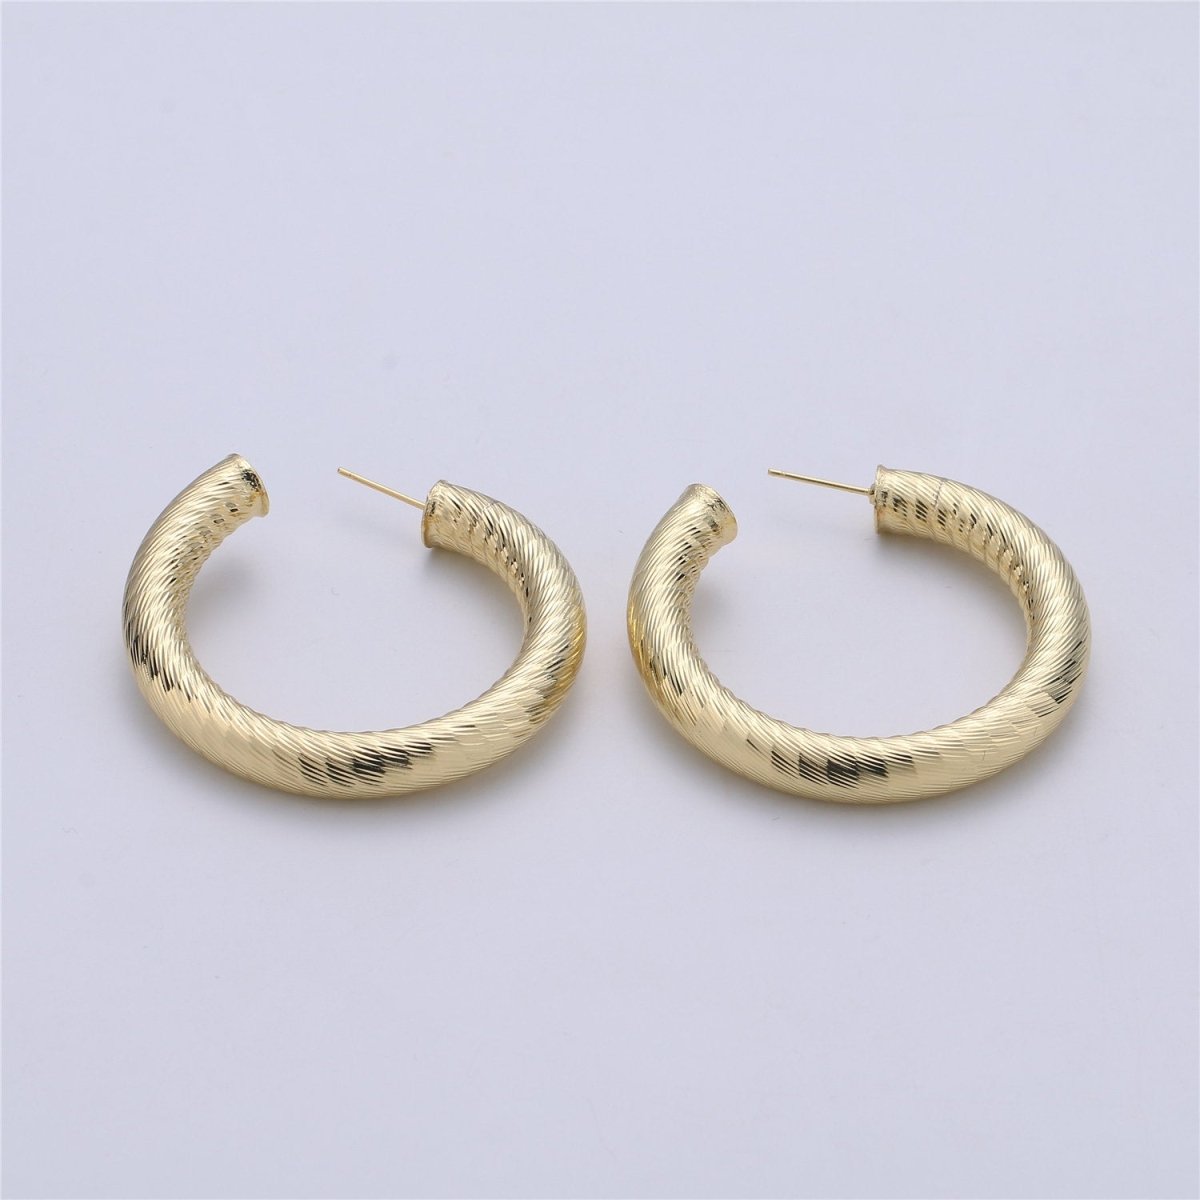 Simple Medium Thick 14k Gold Filled Hoops Earring 30mm, 40mm, 50mm 6mm thickness Q-005 Q-007 Q-009 - DLUXCA